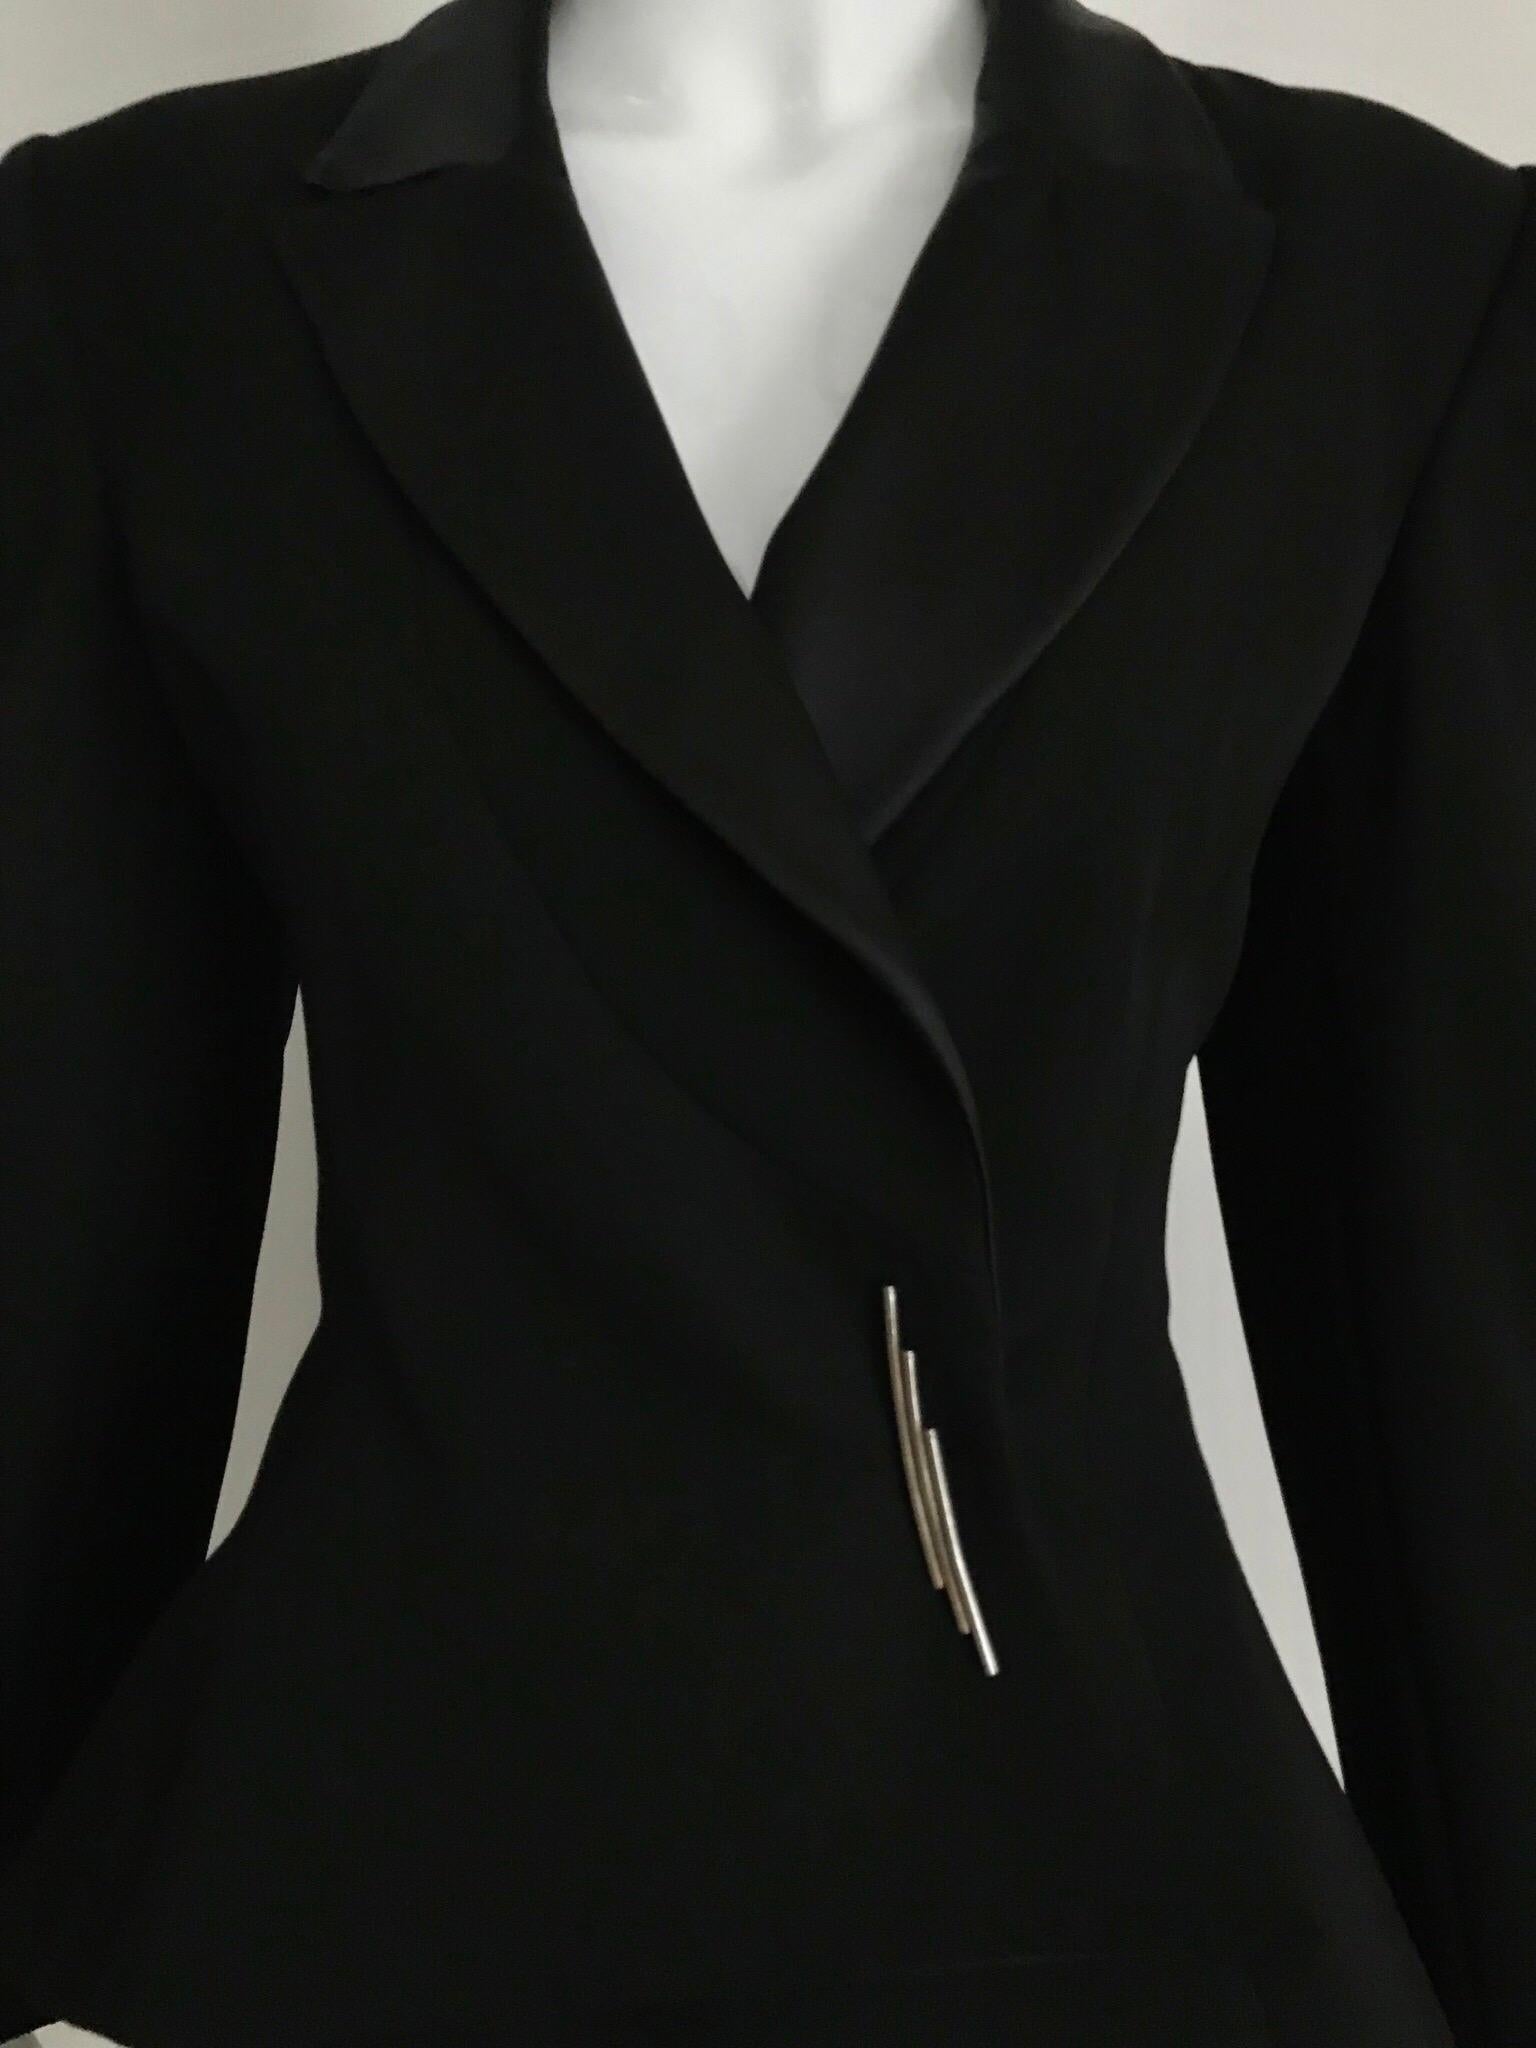 1980s Black Claude Montana asymetrical  peplum Jacket. Jacket has satin lapel.
Bust: 36 inches/ Waist: 30 inches
**label has been removed
**** This Garment has been professionally Dry Cleaned and Ready to wear.

